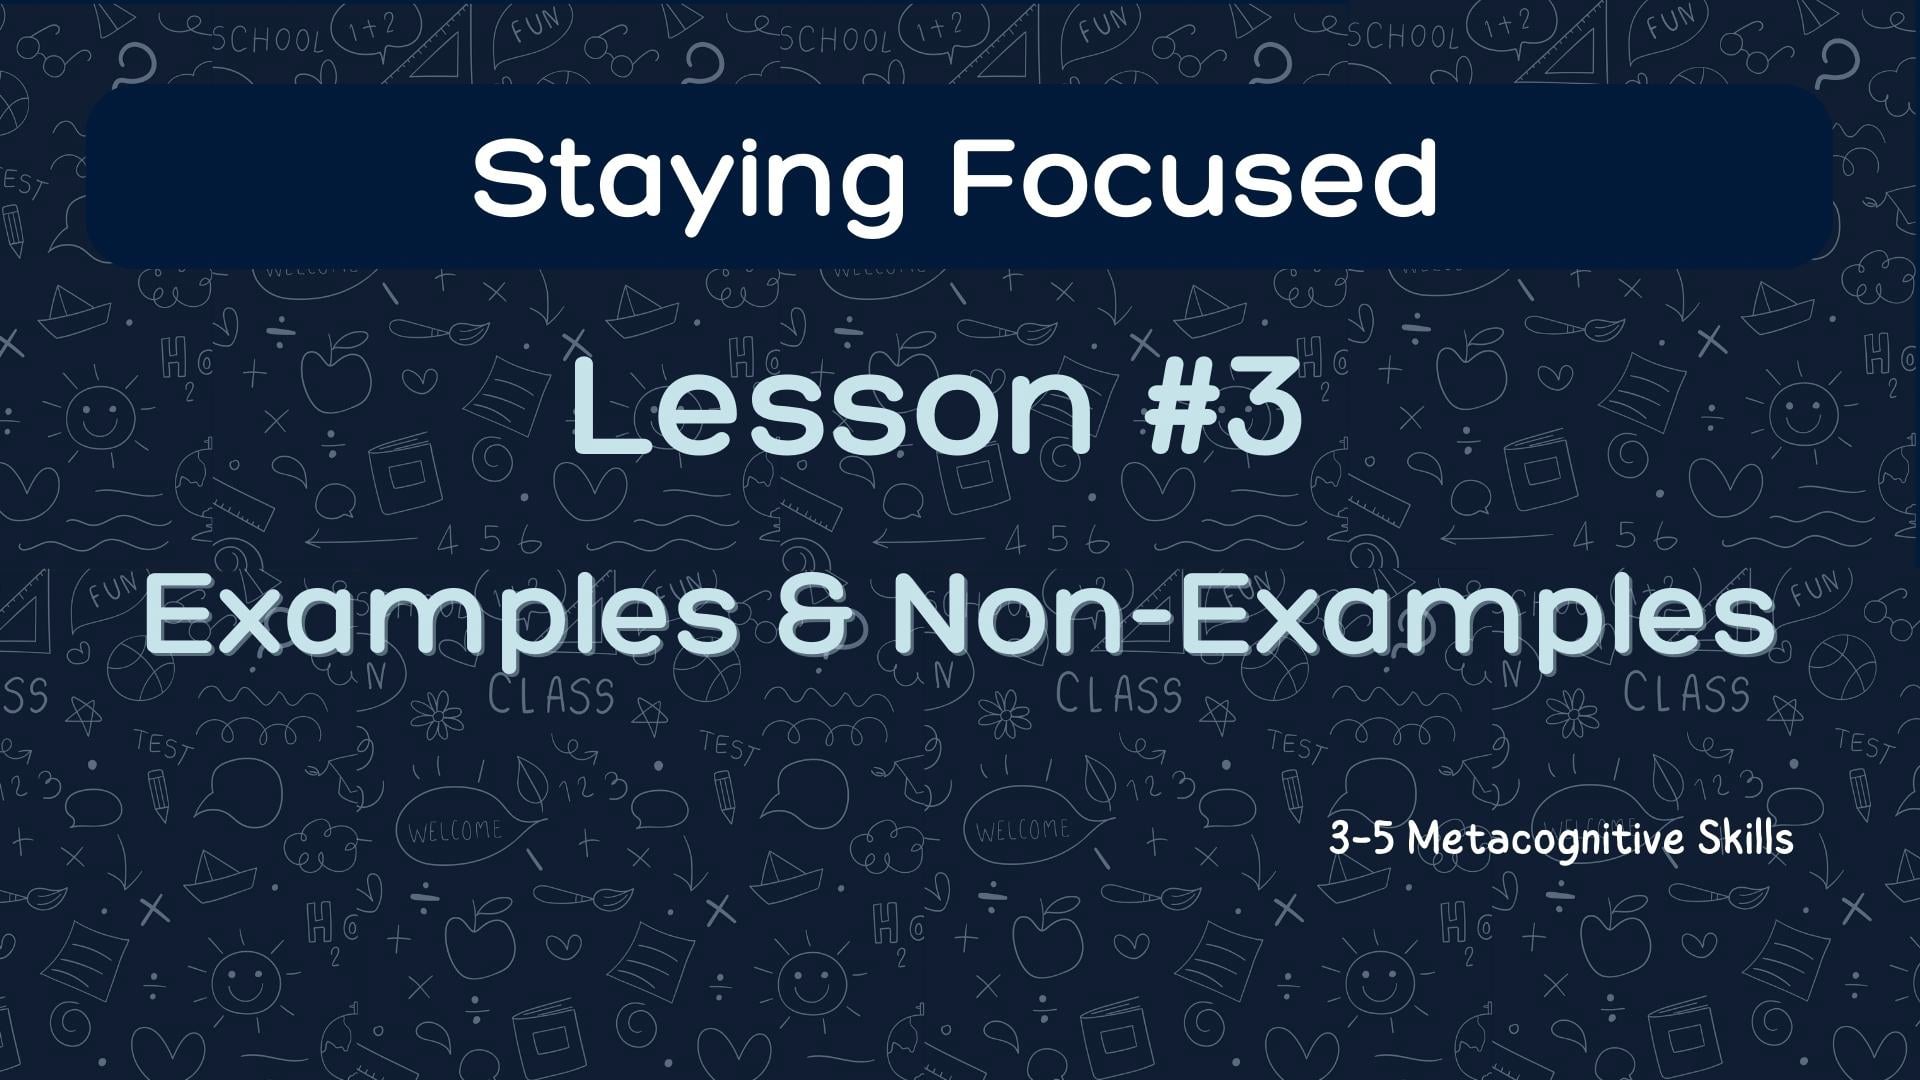 esson #3: Examples & Non-Examples video thumbnail